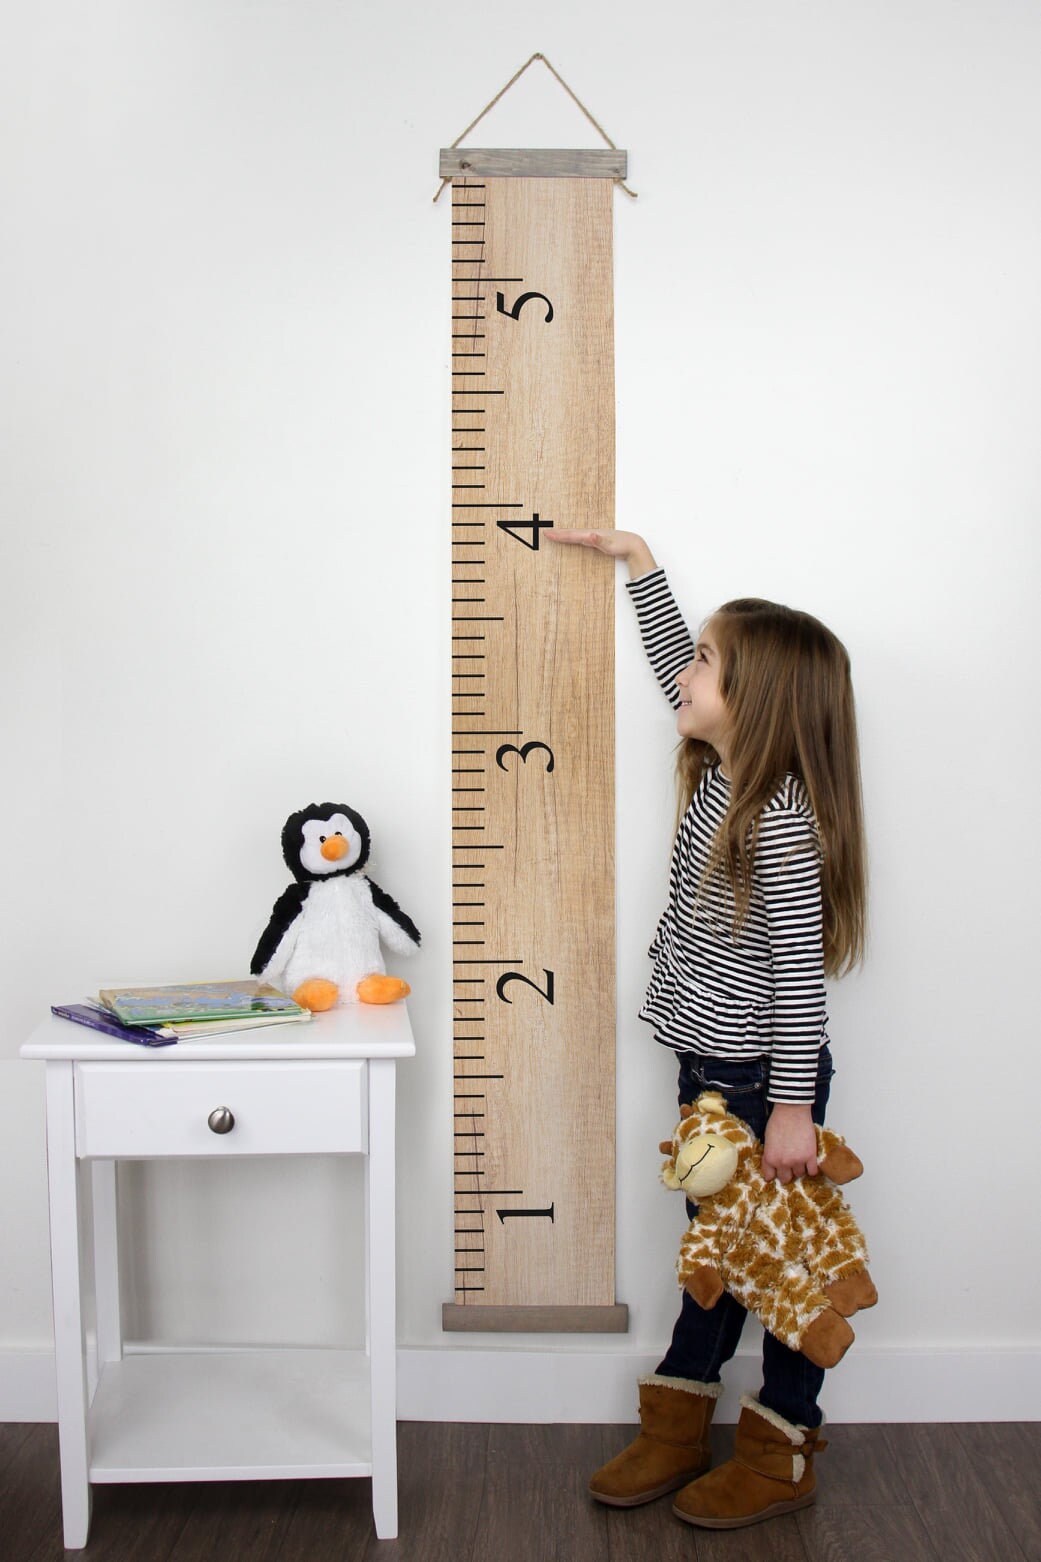 Outfmvch Measuring Tools x Wall 20 Height and Meter 200cm Girls Nursery Kids Wall for Decor Height Boys Room Record Kids Ruler Chart Kids Tools & Home